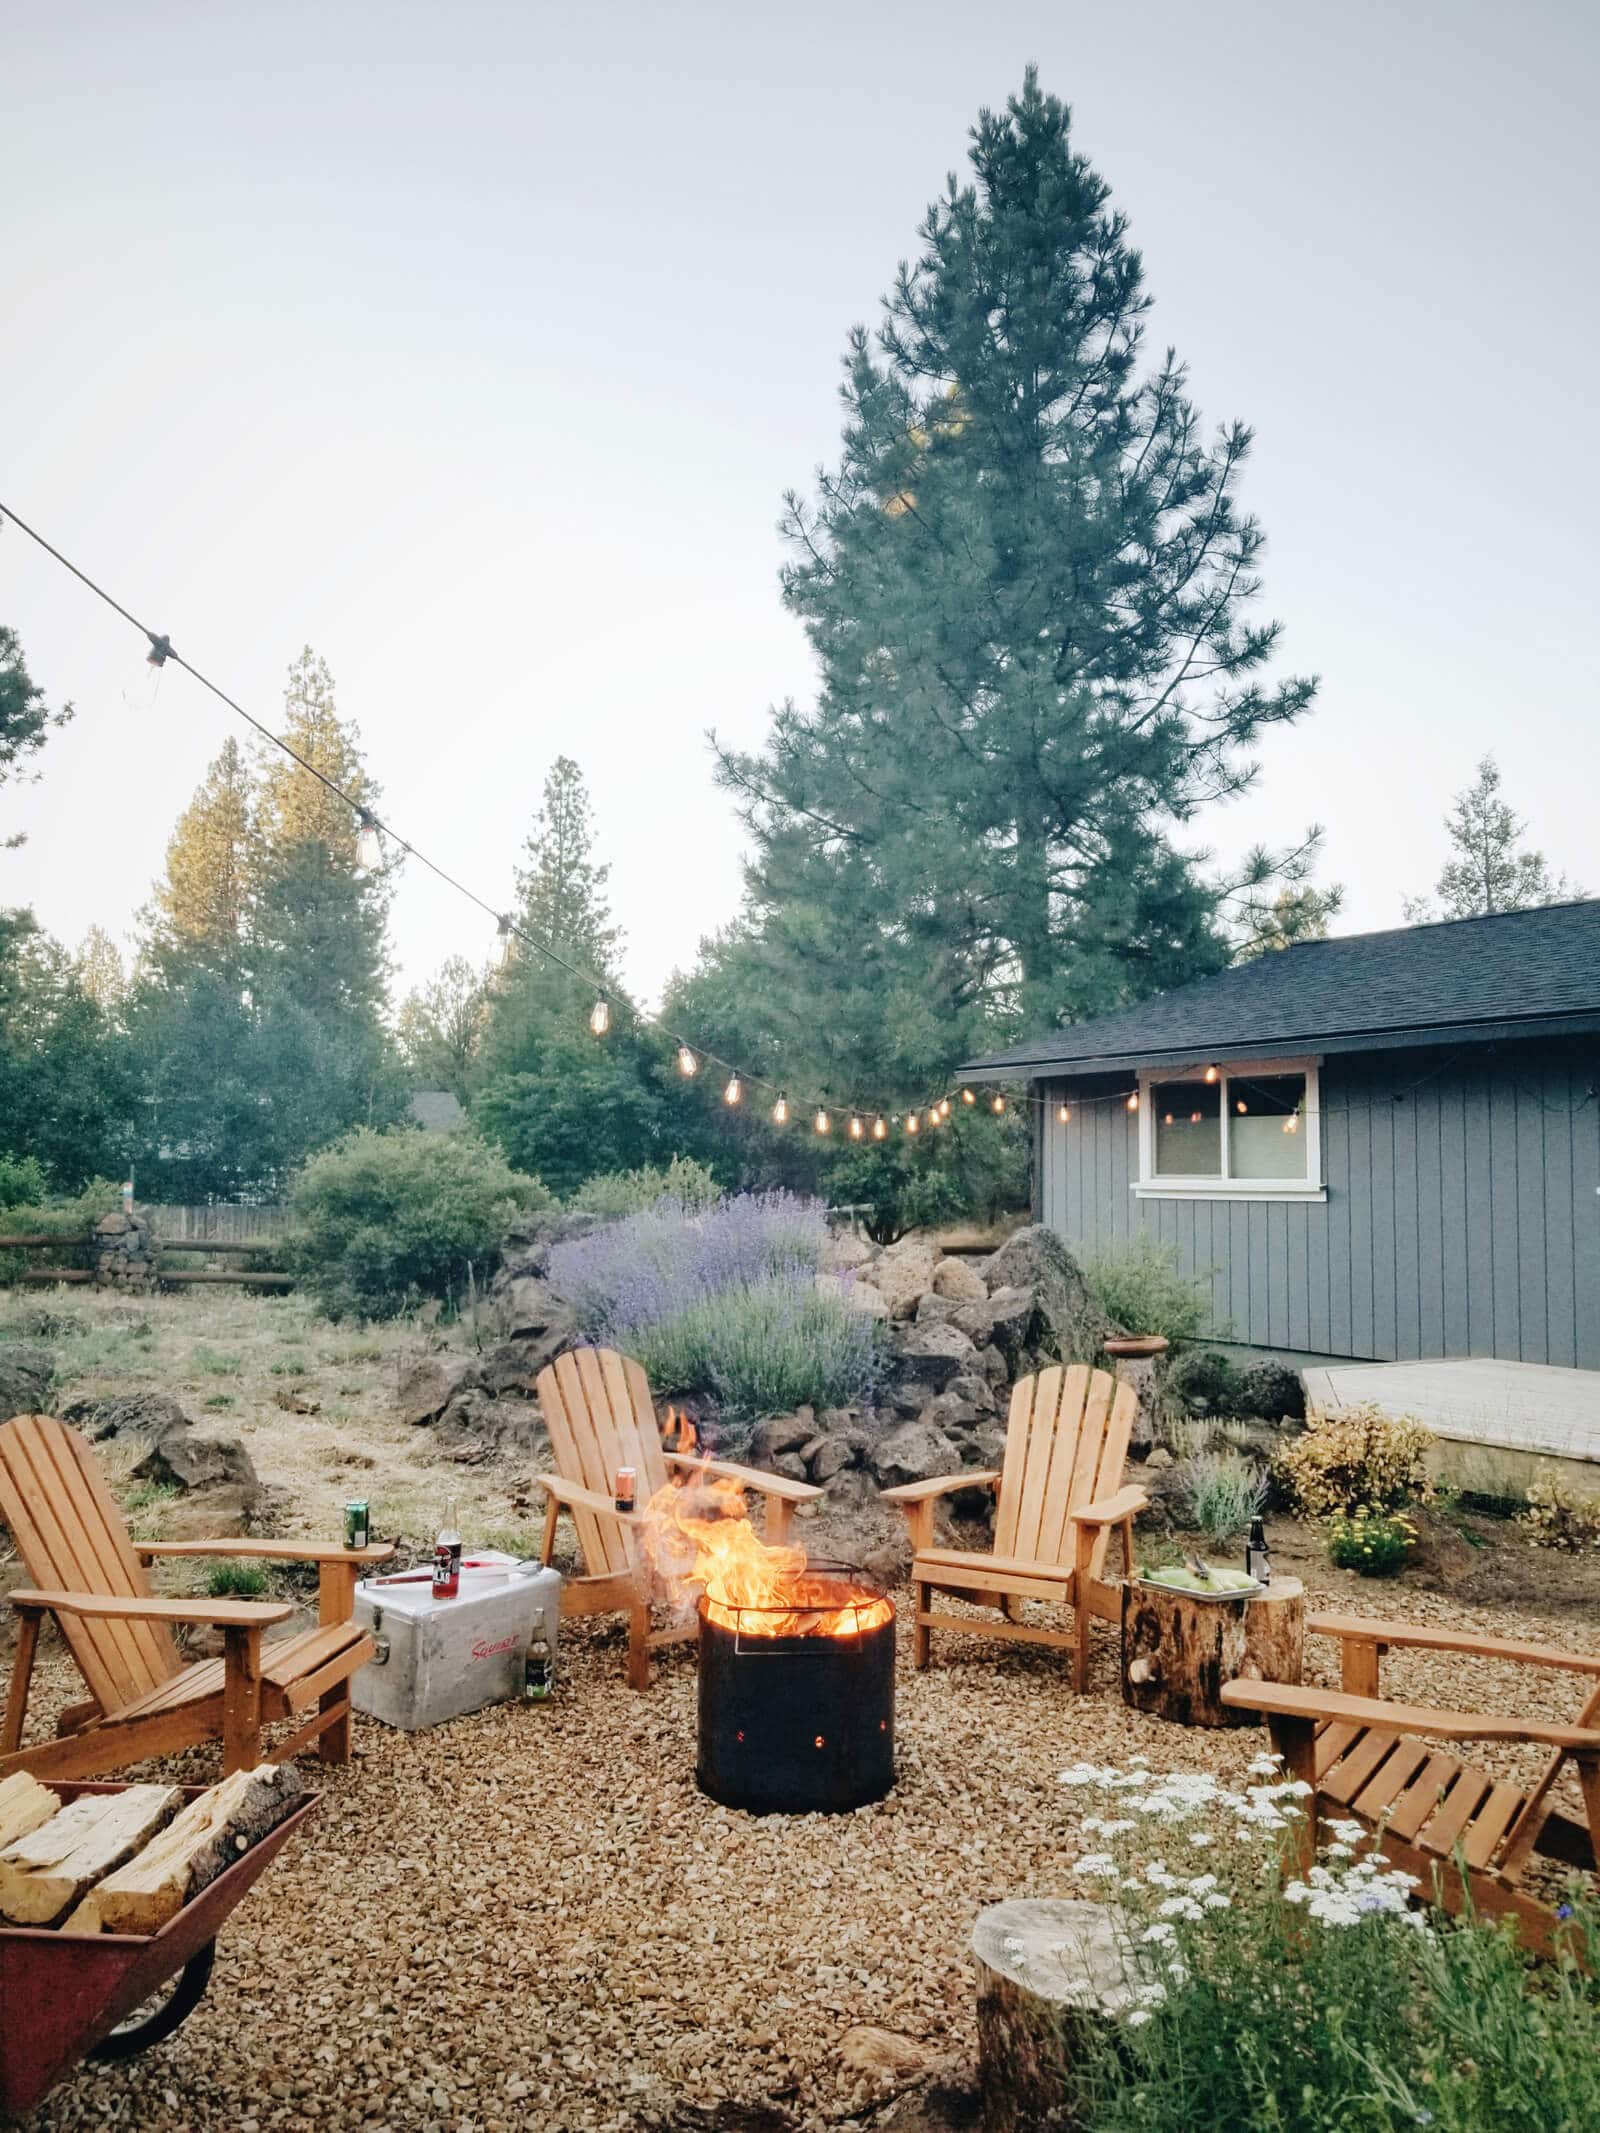 The Backyard Fire Cookbook is coming May 2019